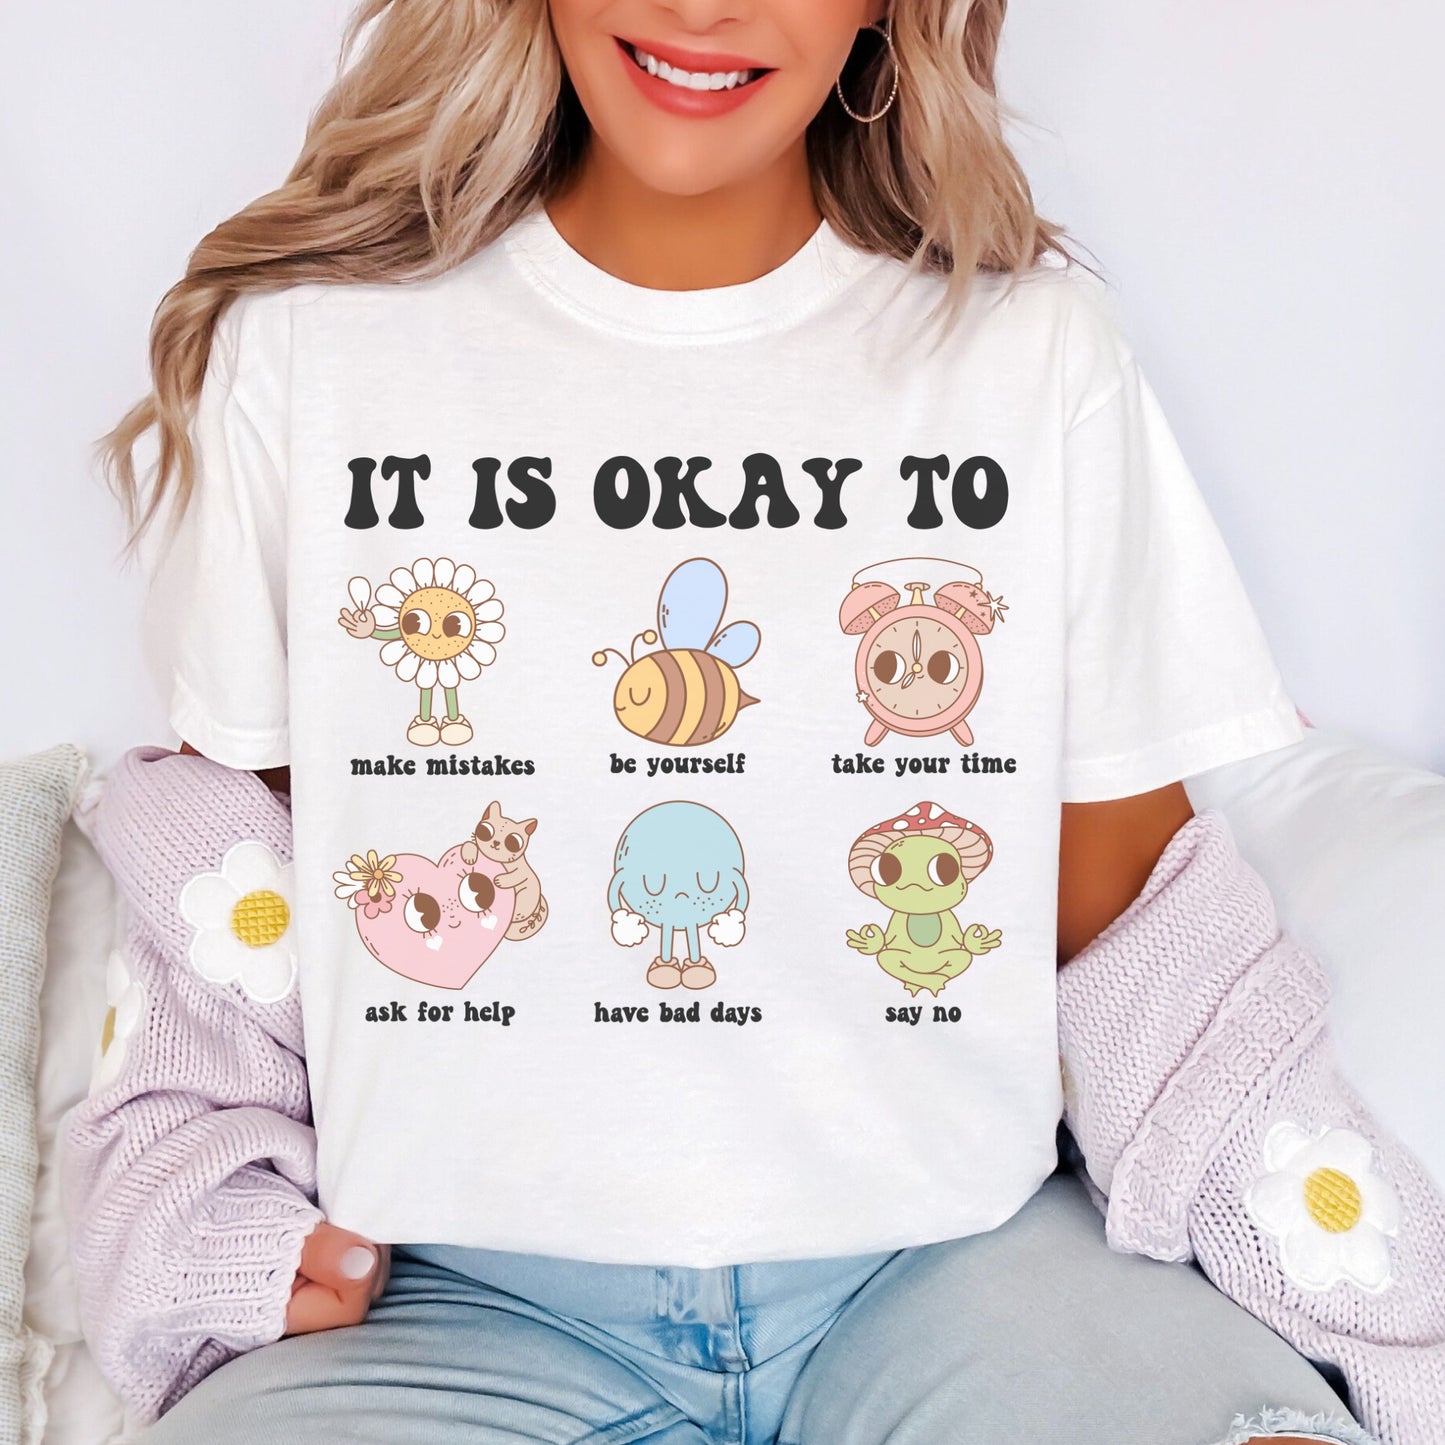 Comfort Colors® 'It Is Okay To' Shirt